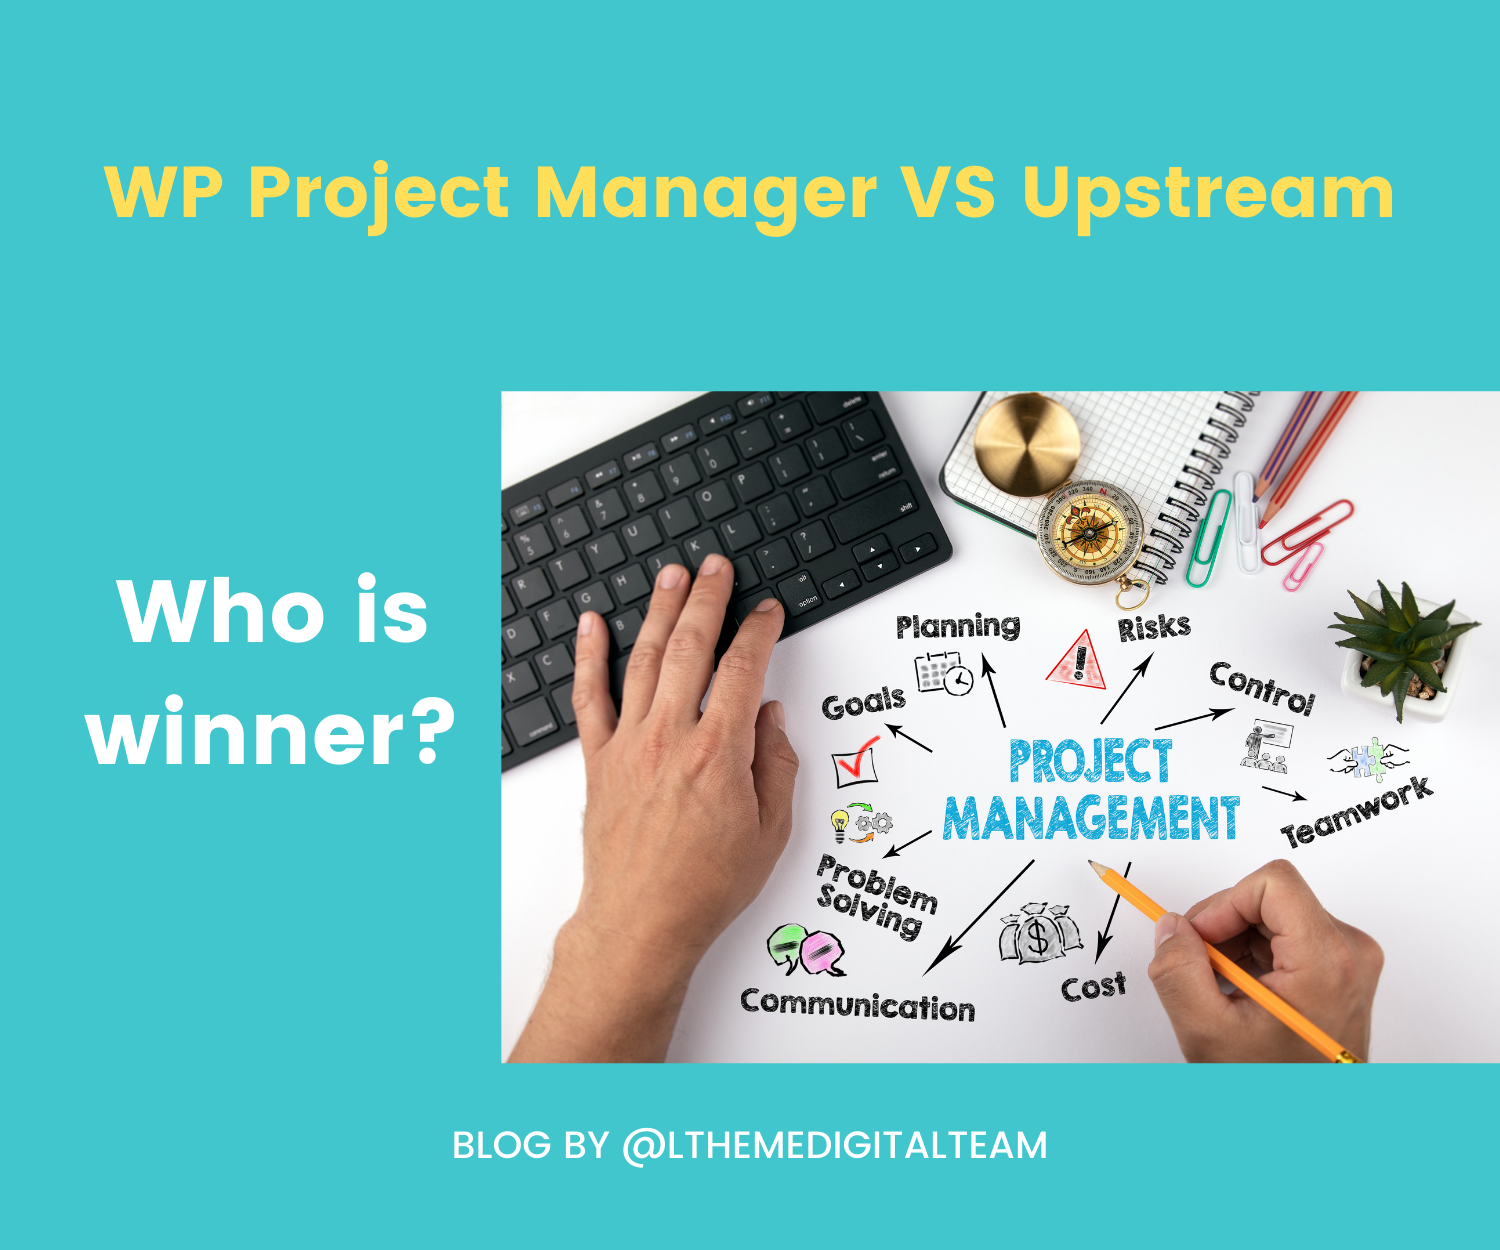 WP Project Manager Vs Upstream (Free version): Who is winner?